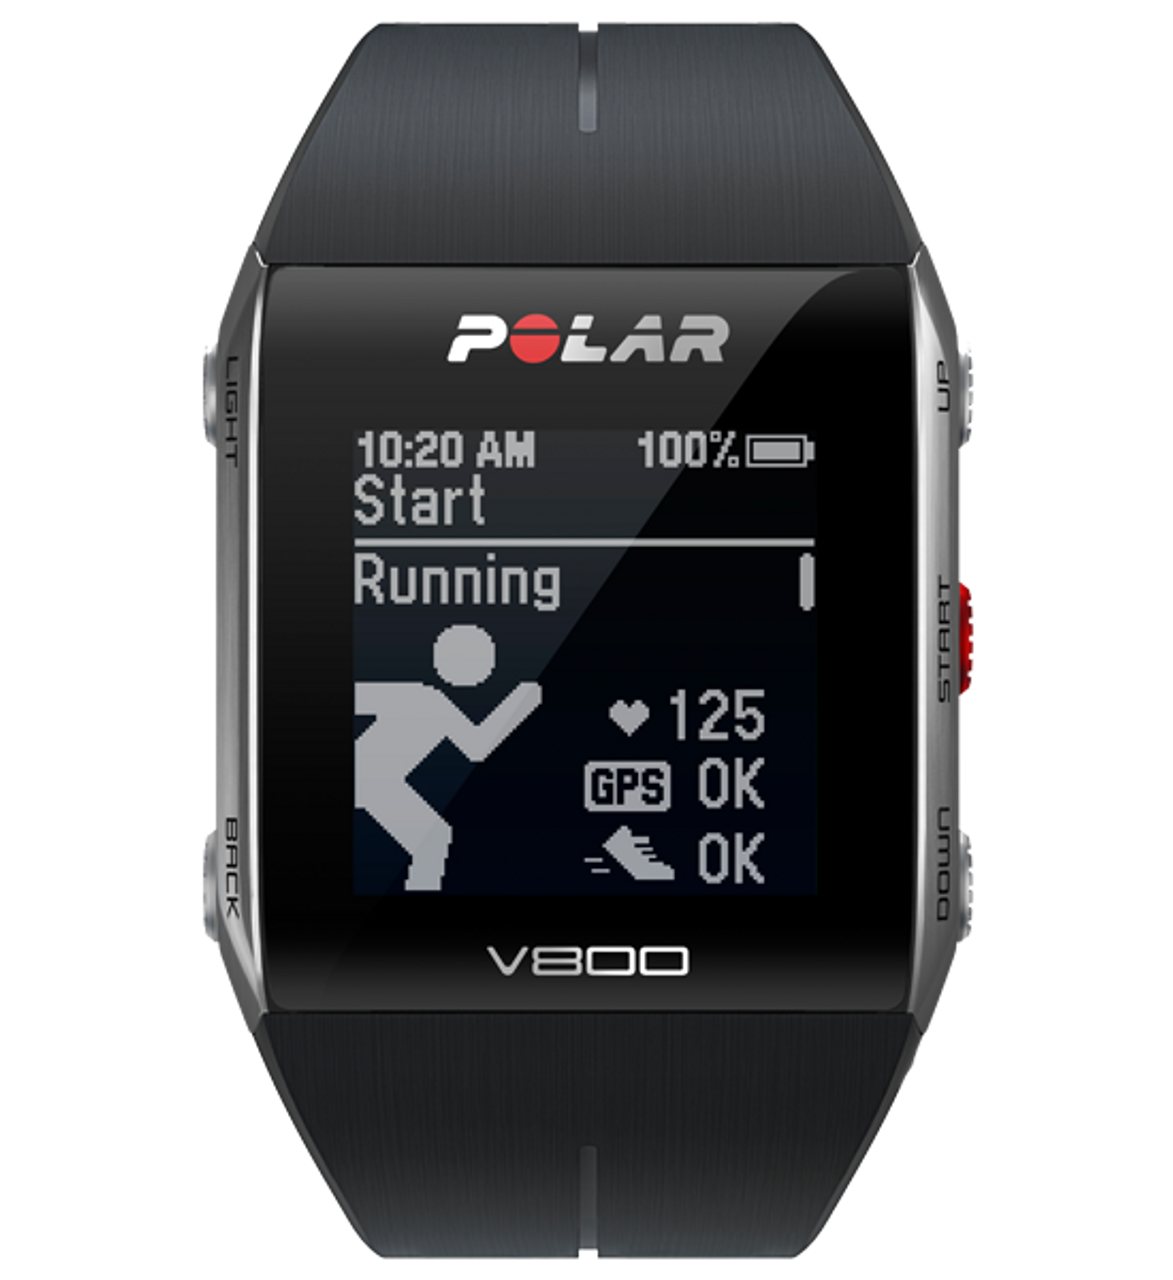 Polar Sports | The Fitness Outlet